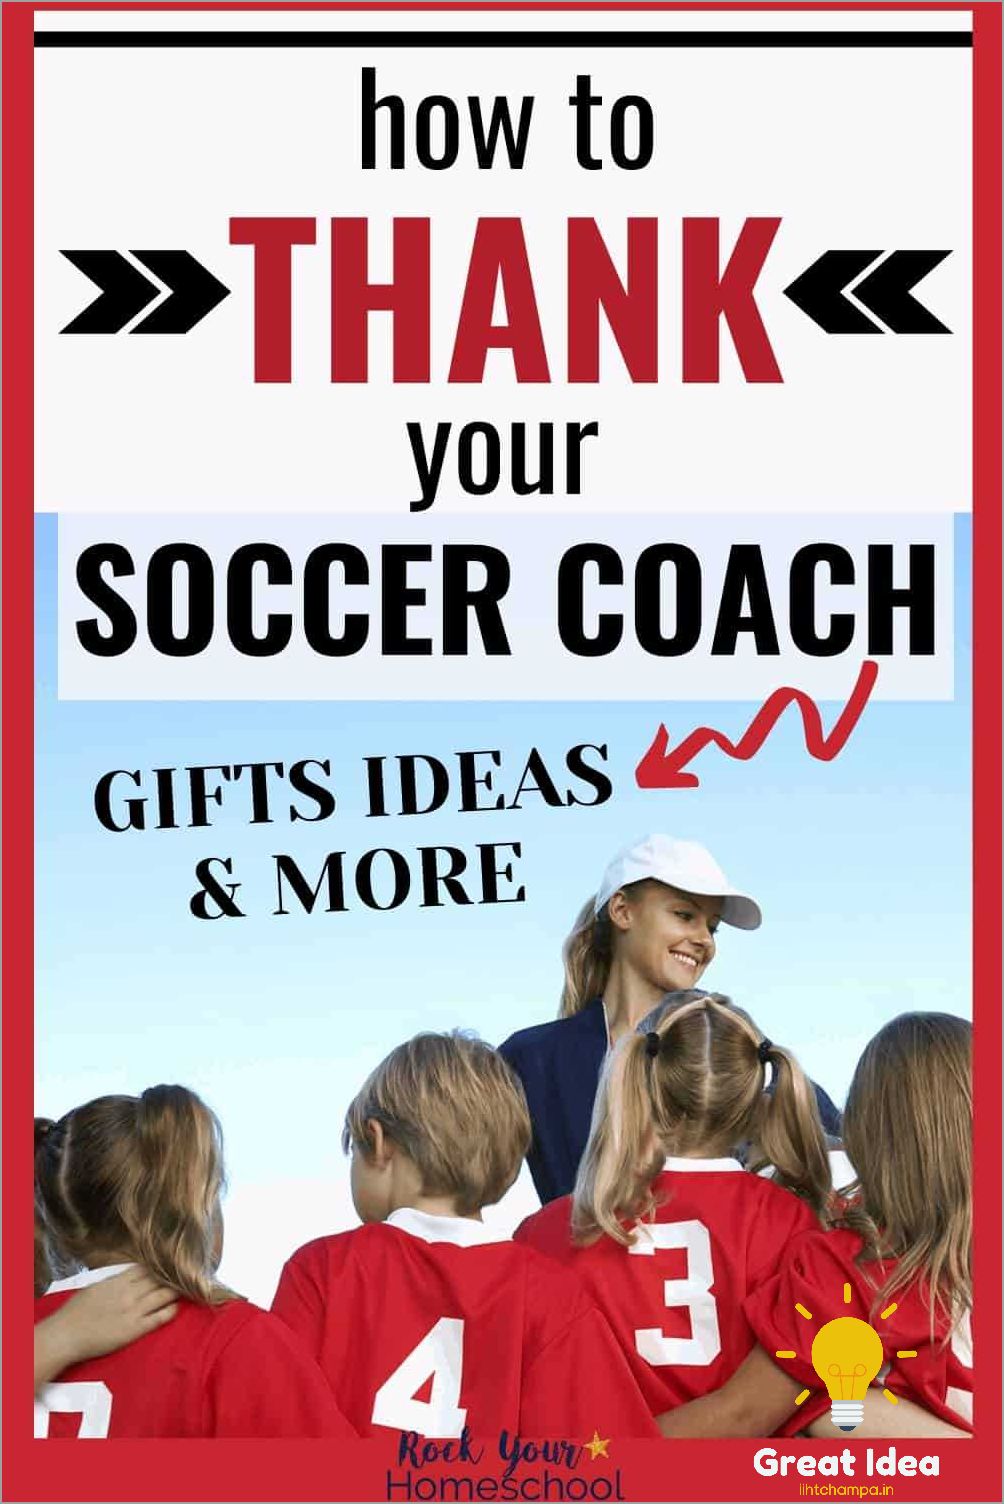 Improve Your Coaching Skills with the Best Training Equipment